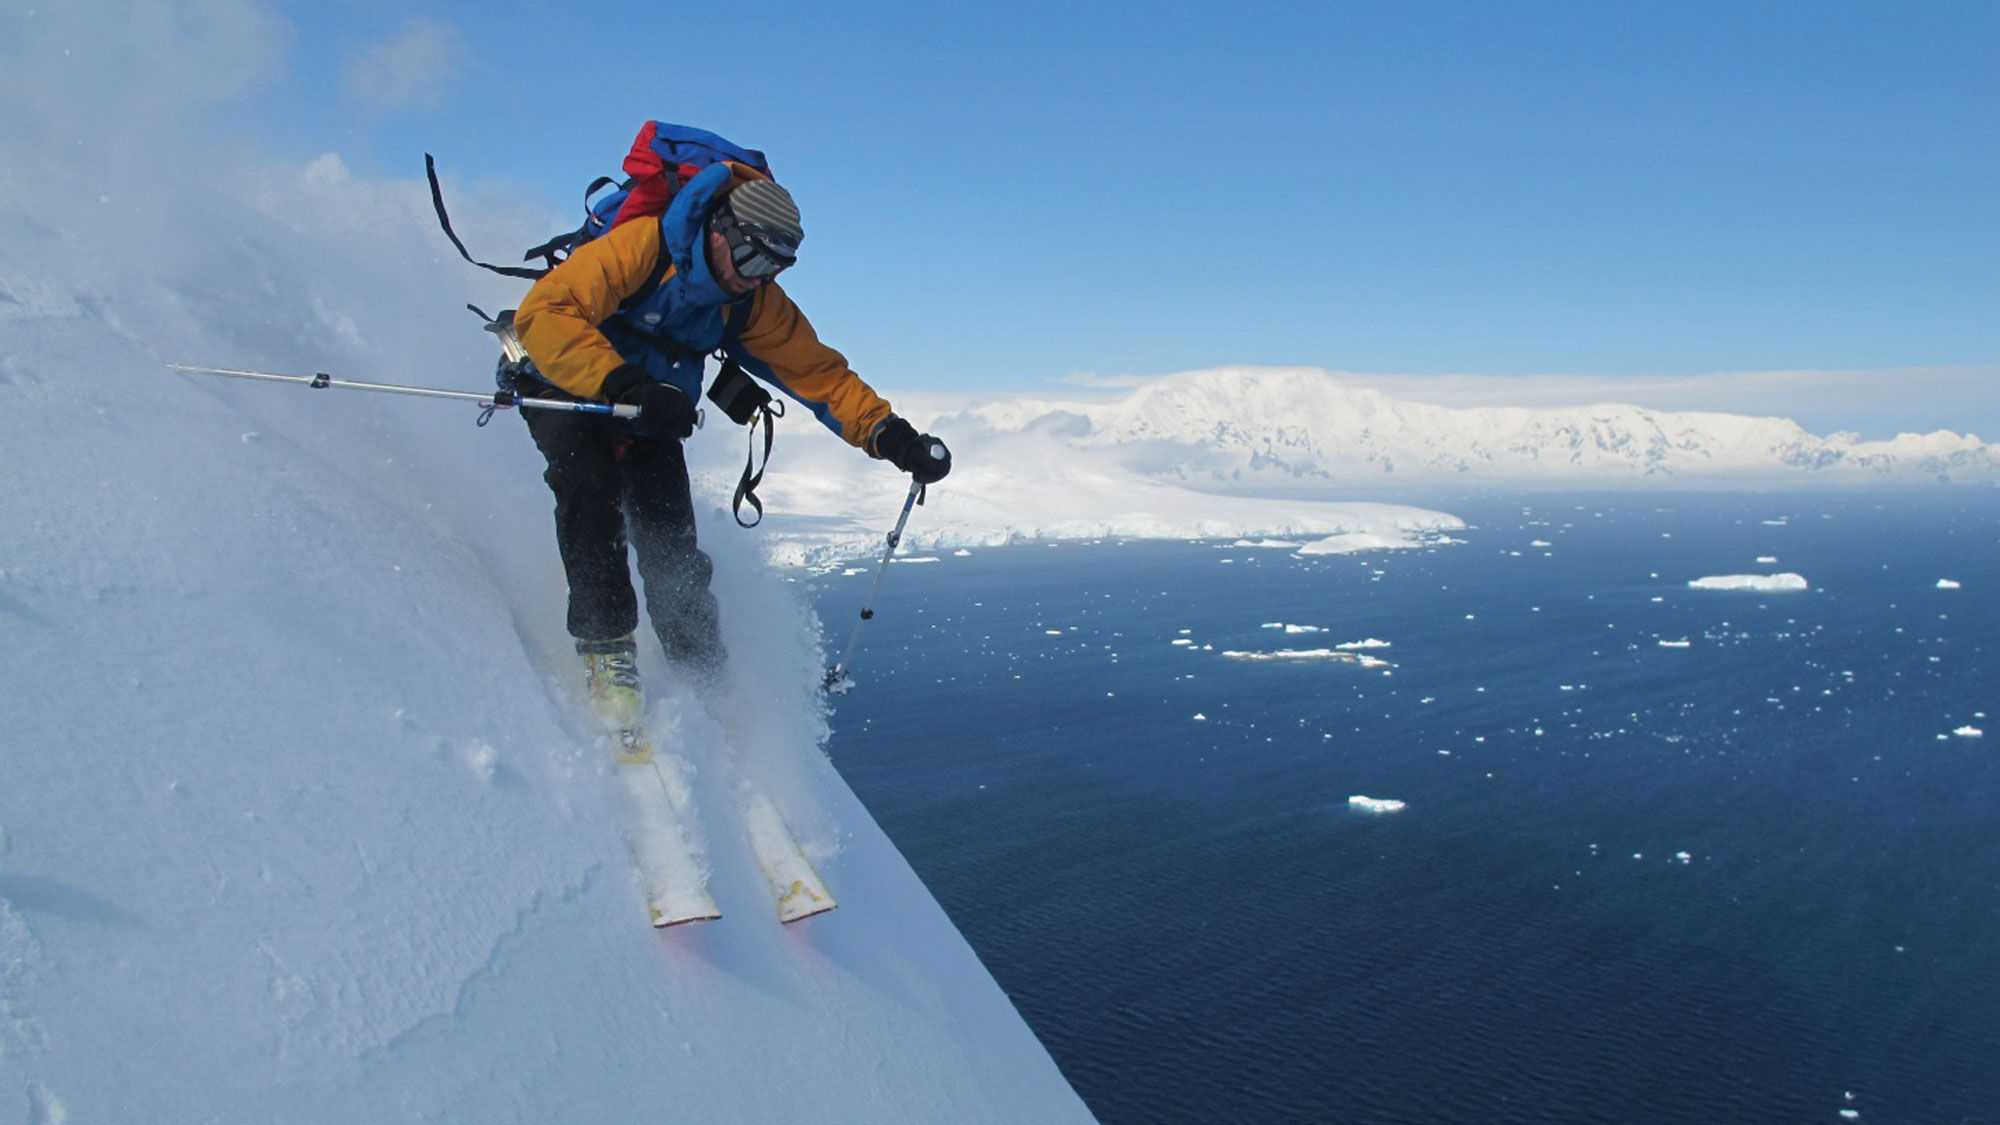 A heli-skier races down a mountain in Antarctica on an extreme adventure tour with Pelorus.